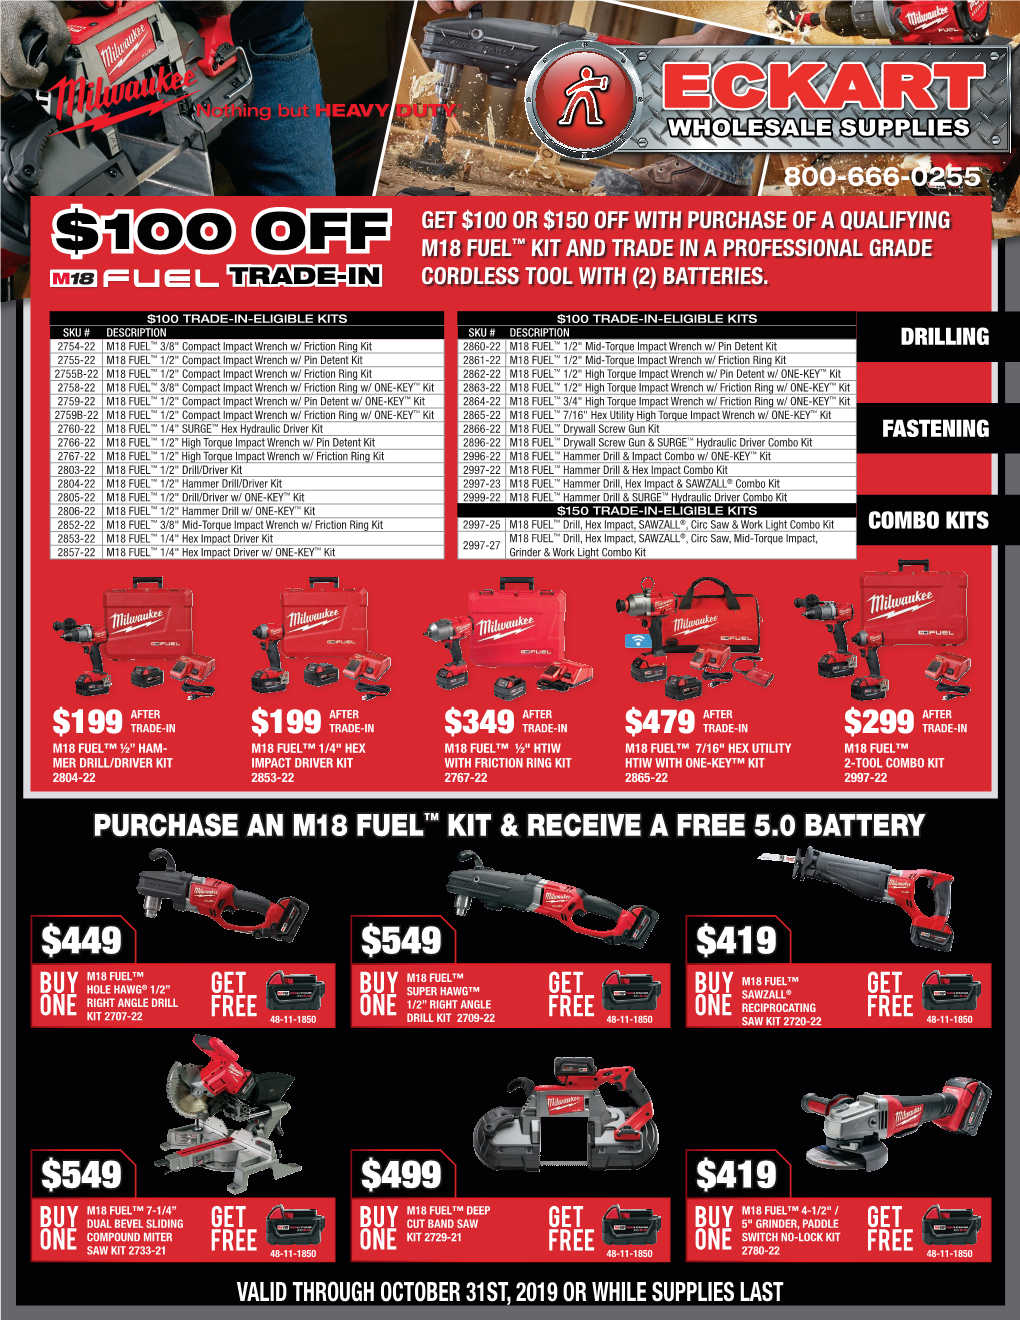 100 Or $150 Off with Purchase of a Qualifying $100 Off M18 Fuel™ Kit and Trade in a Professional Grade Trade-In Cordless Tool with (2) Batteries